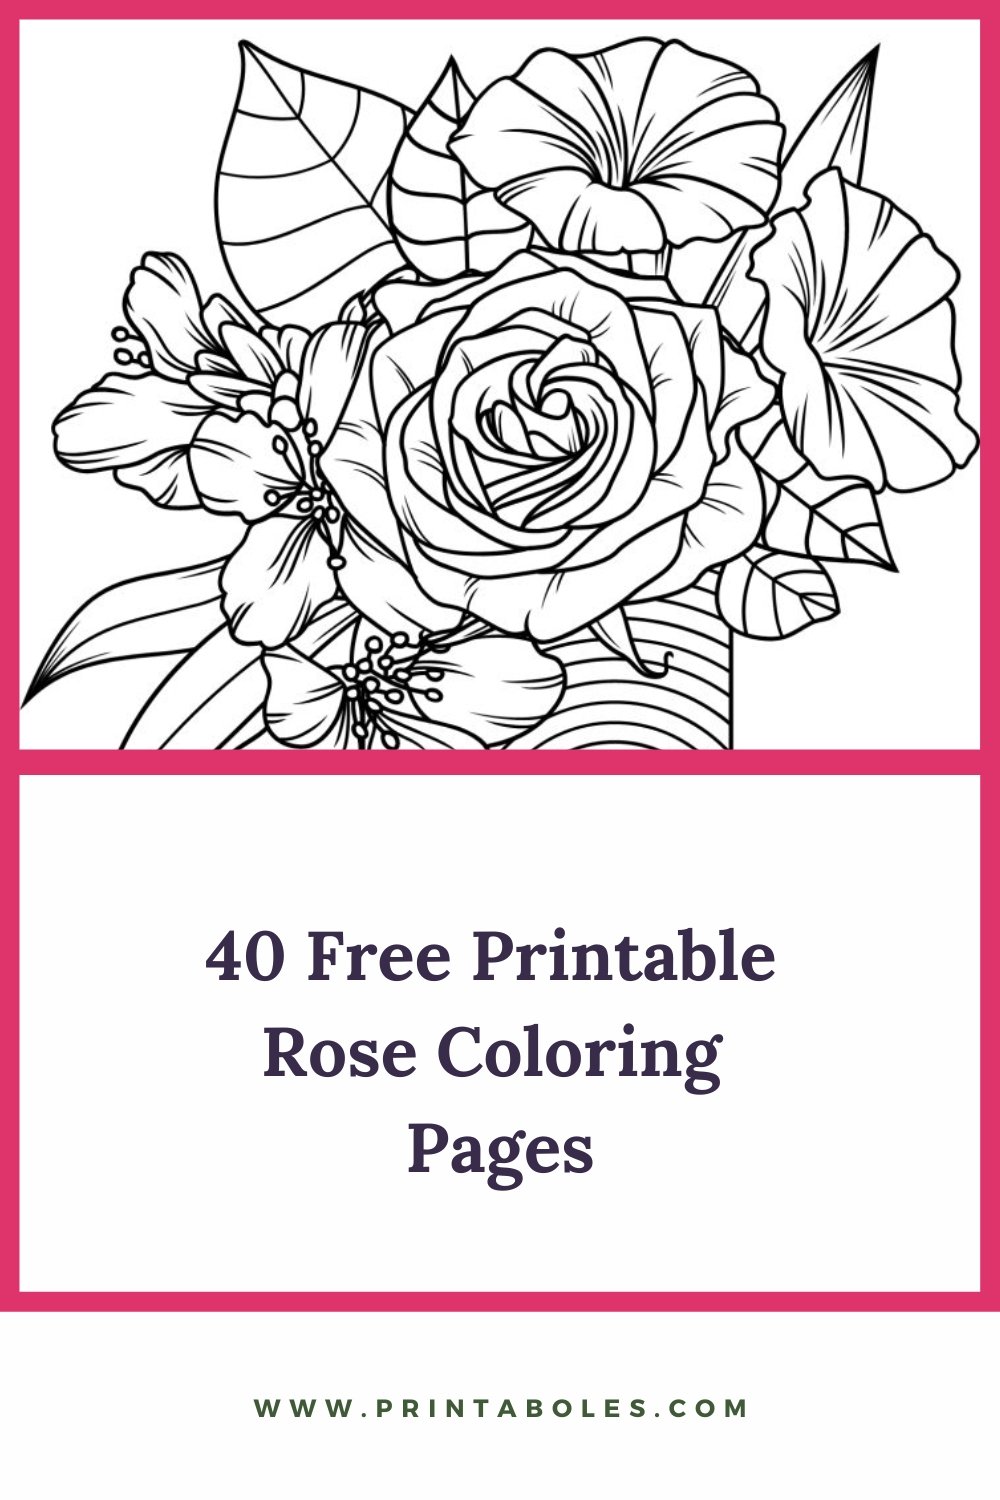 40 Free Printable Rose Coloring Pages